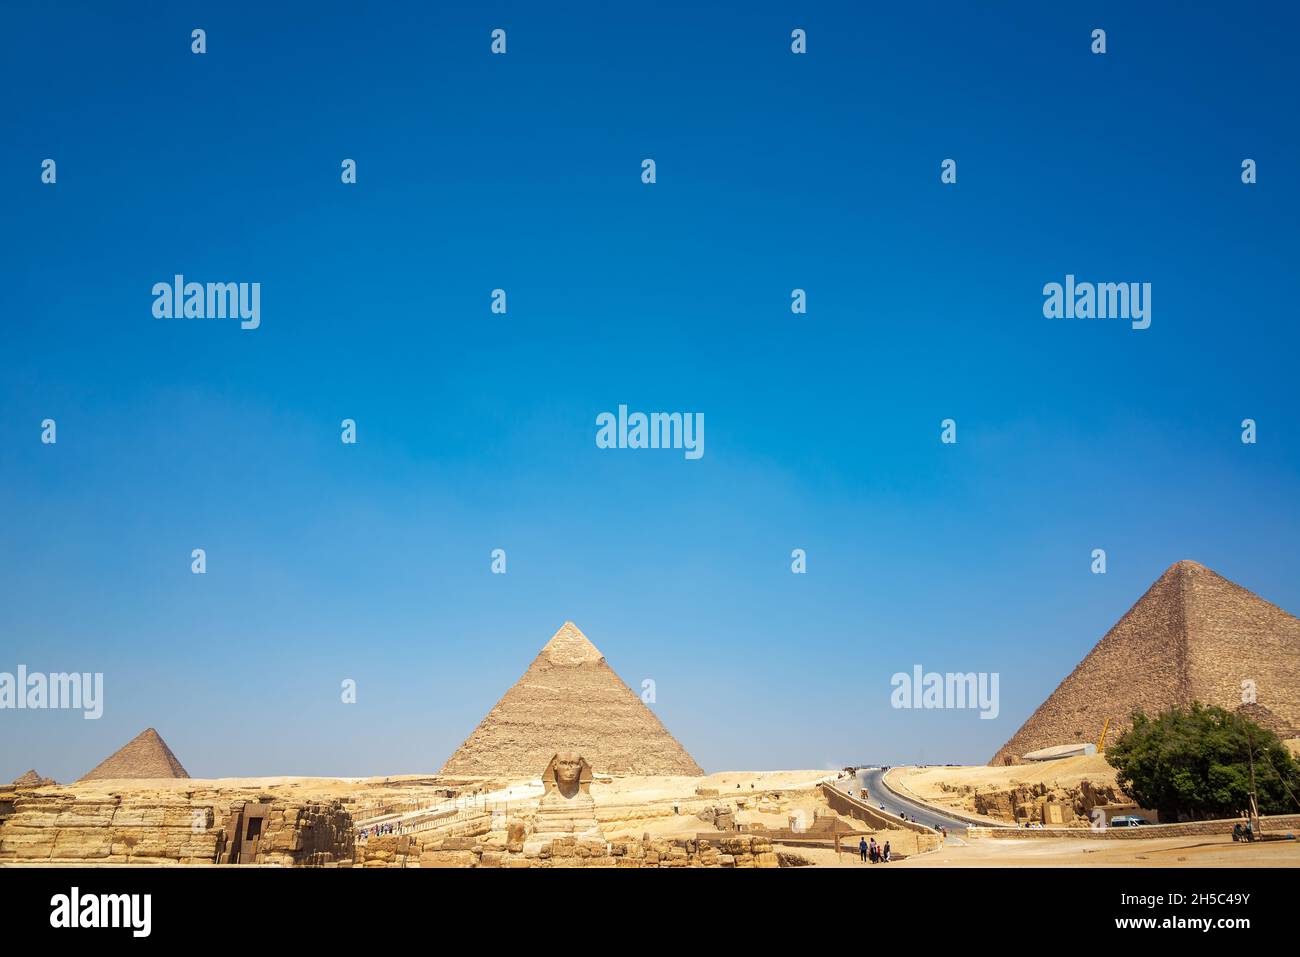 View of the Sphinx and three pyramids in Giza, Egypt Stock Photo